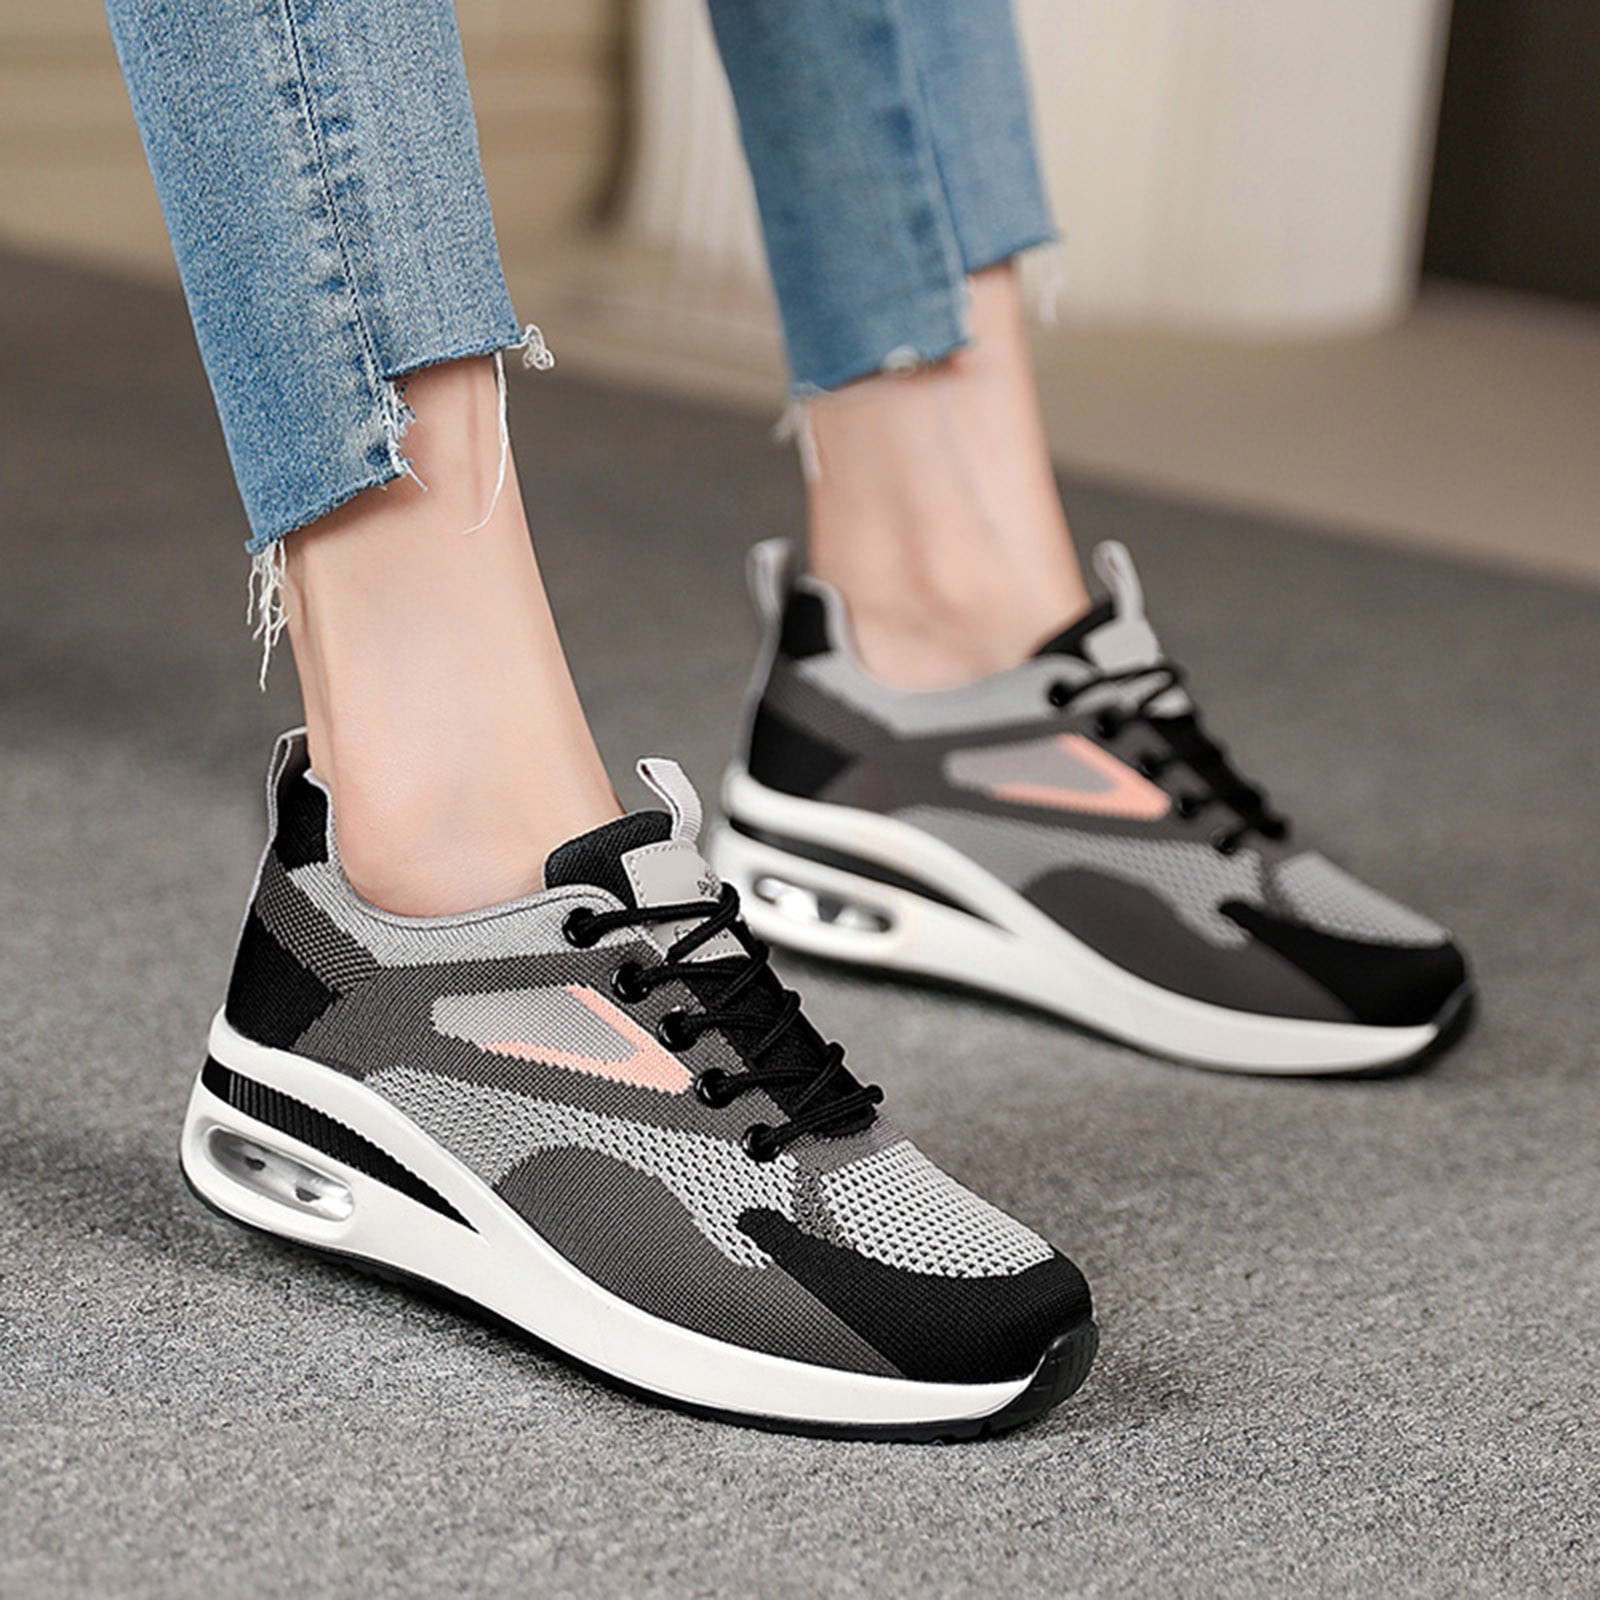 Stylish Casual Sneakers Shoes for Women And Girls Sneakers For Women  (White, Sneakers For Women Price in India - Buy Stylish Casual Sneakers  Shoes for Women And Girls Sneakers For Women (White,